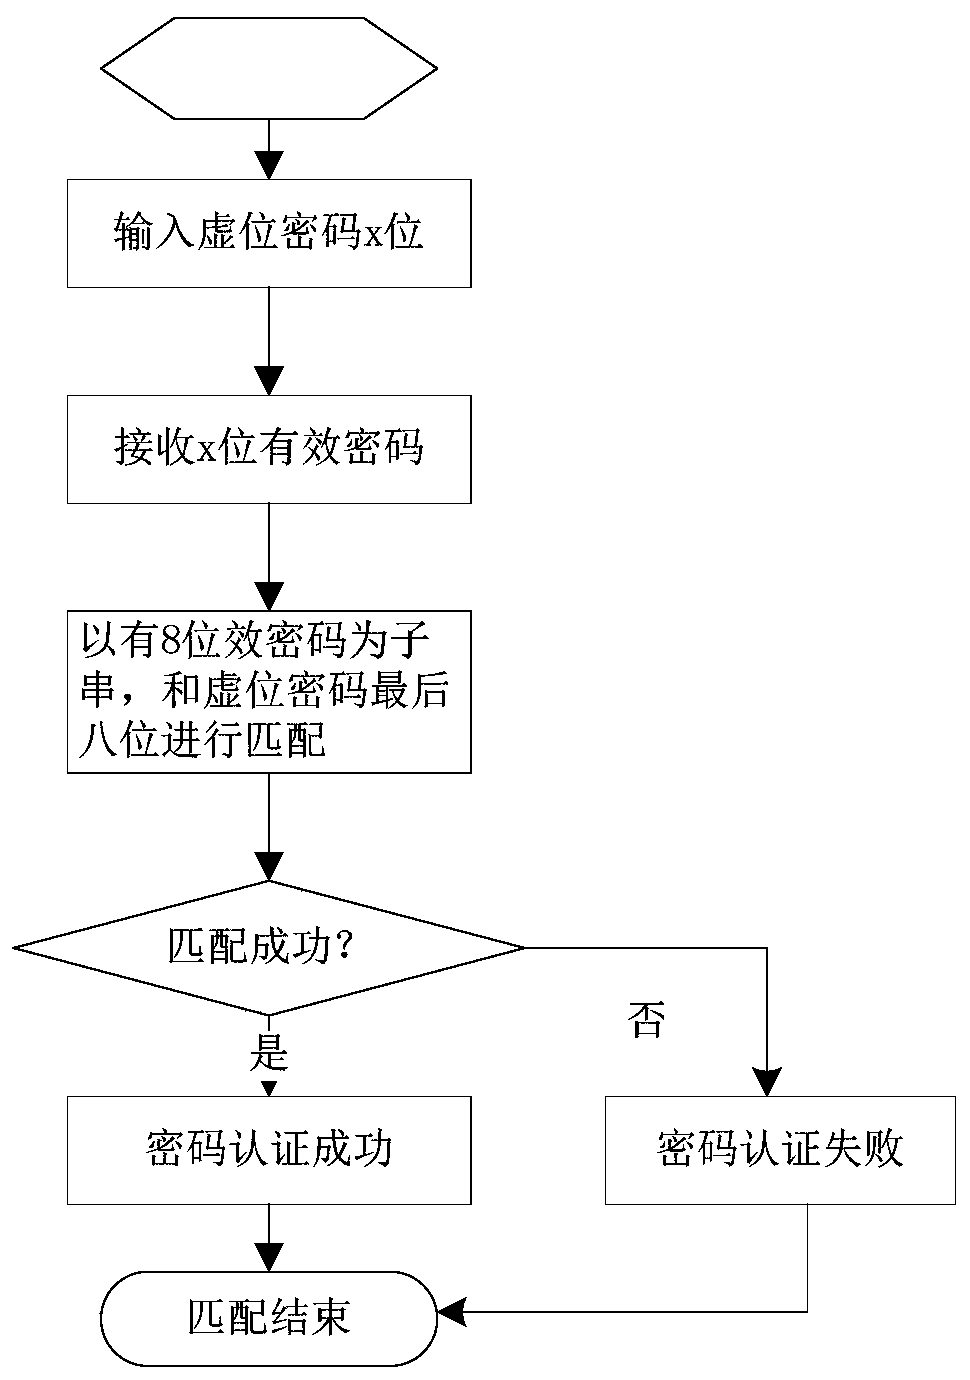 Virtual password security processing method and system